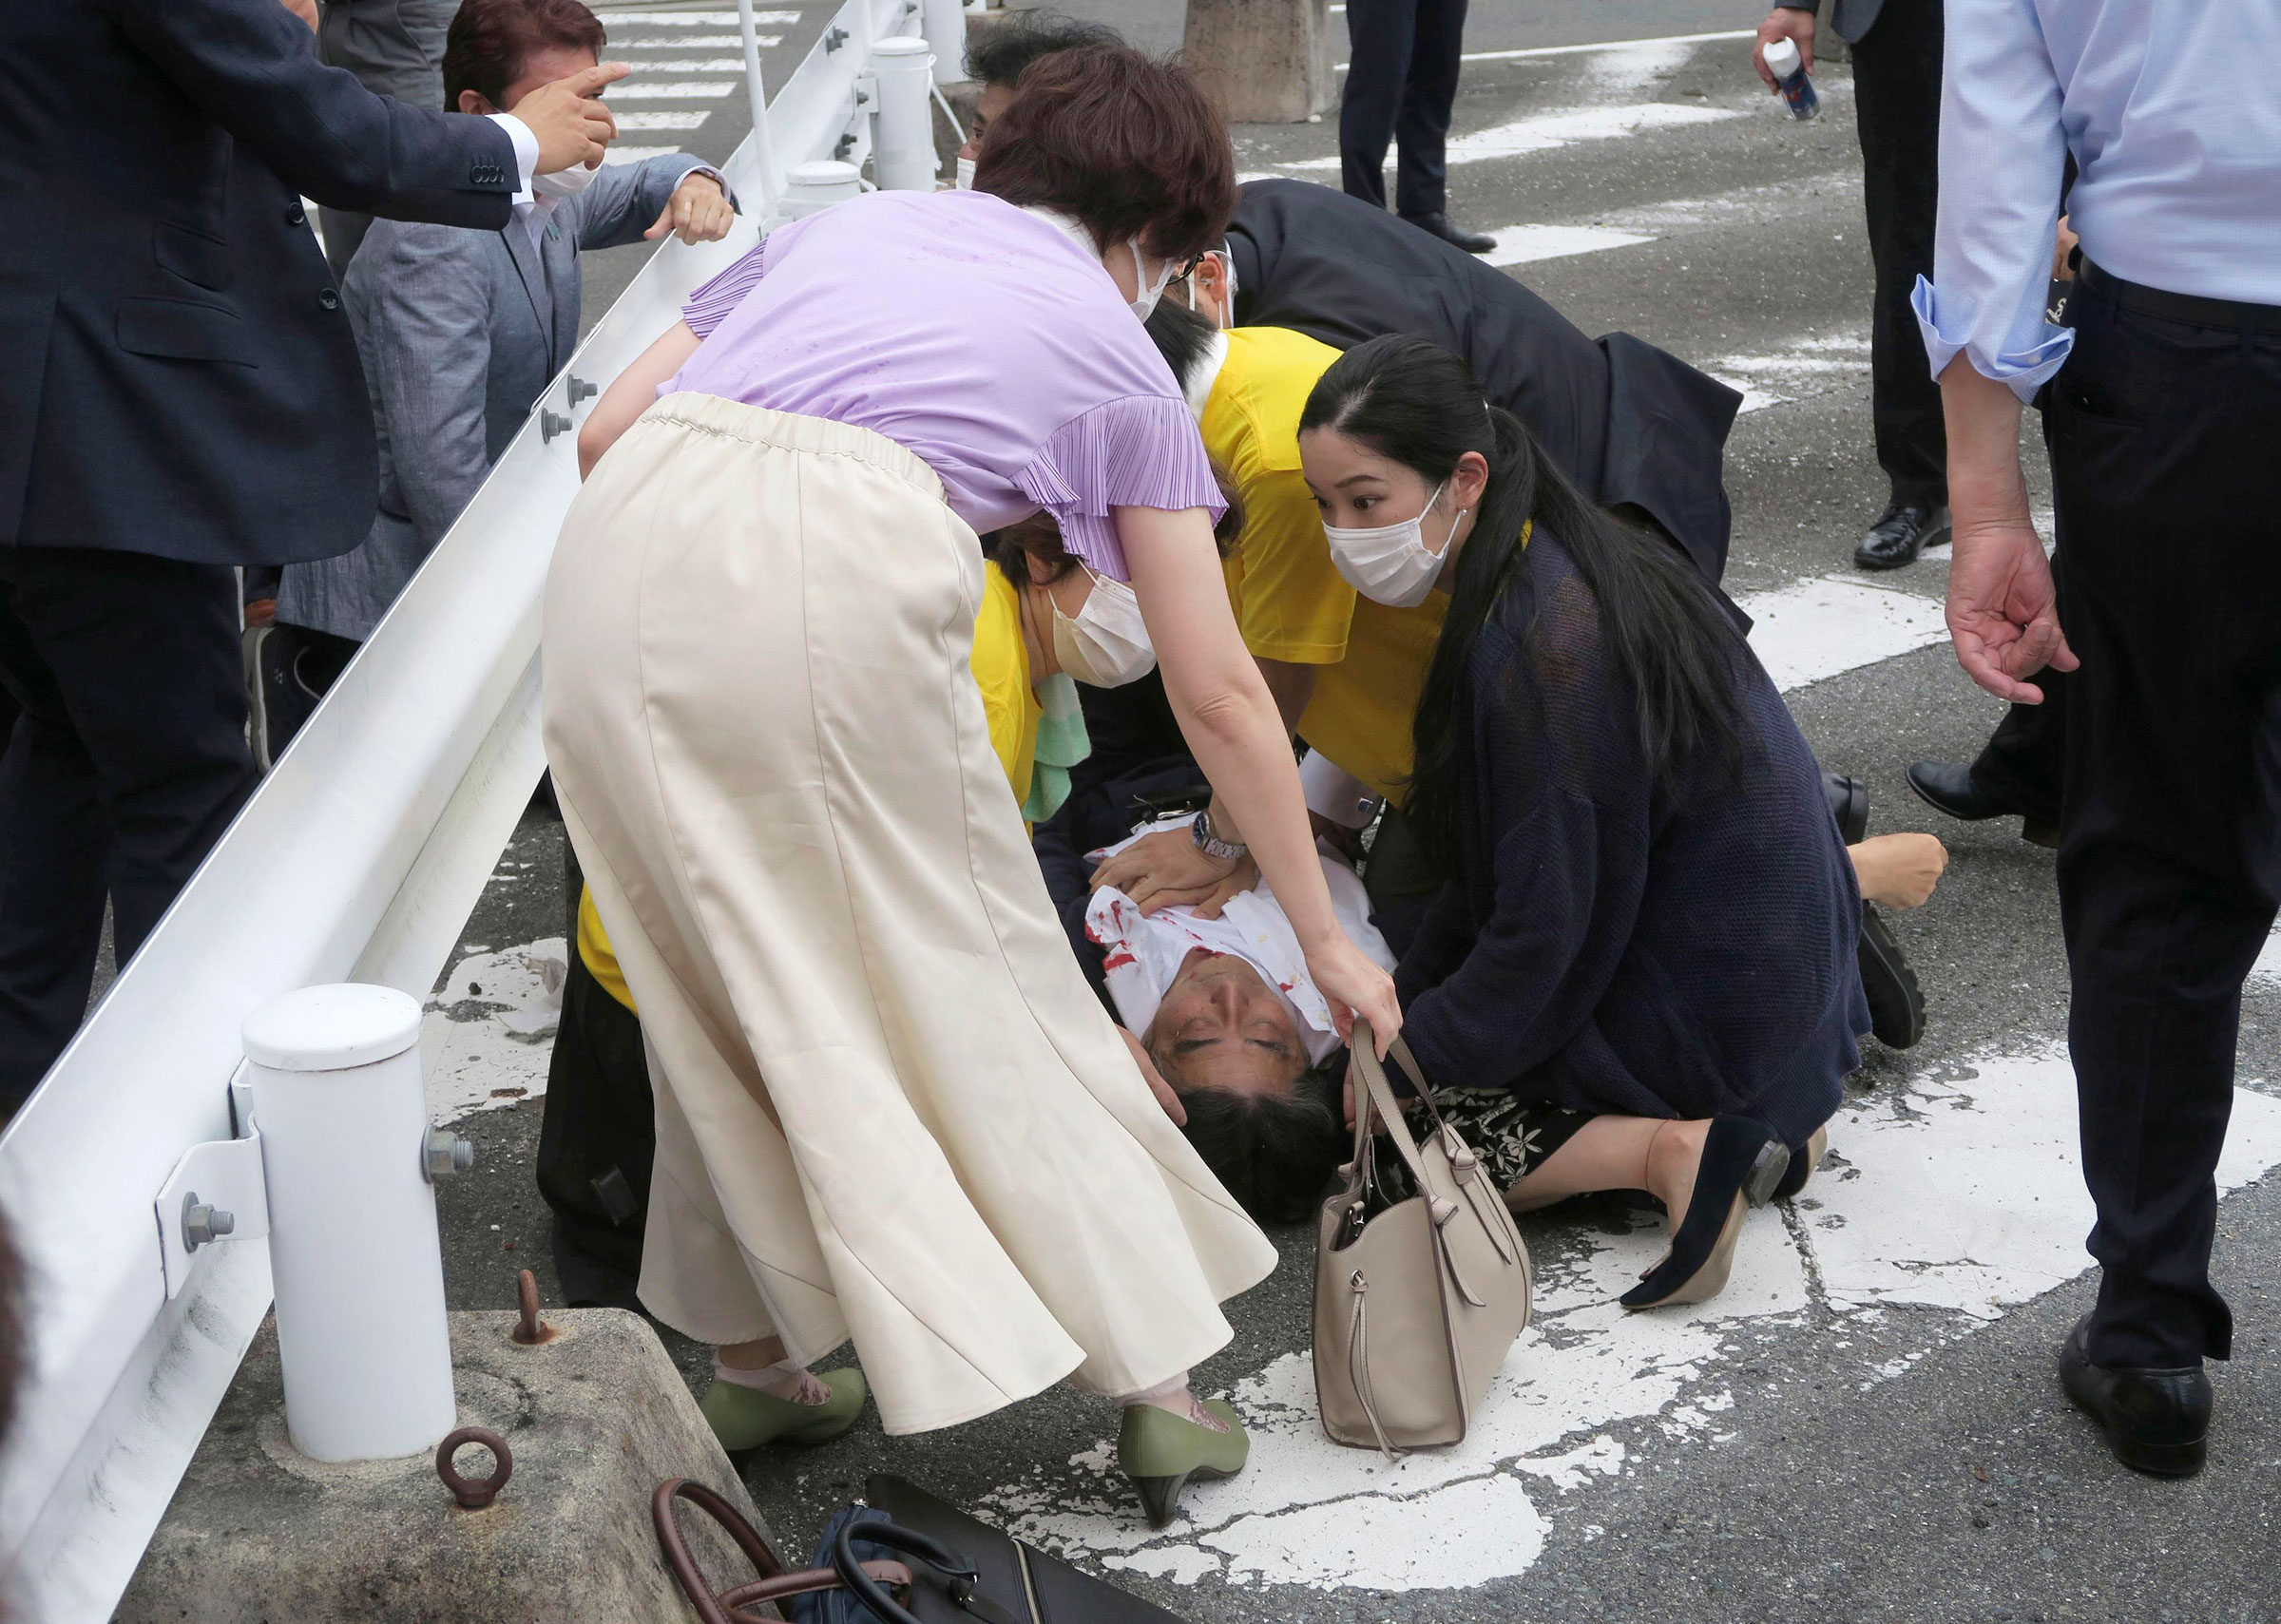 Japan’s former Prime Minister Shinzo Abe, center, falls on the ground after being shot in Nara, western Japan, on July 8. (Kyodo/AP)